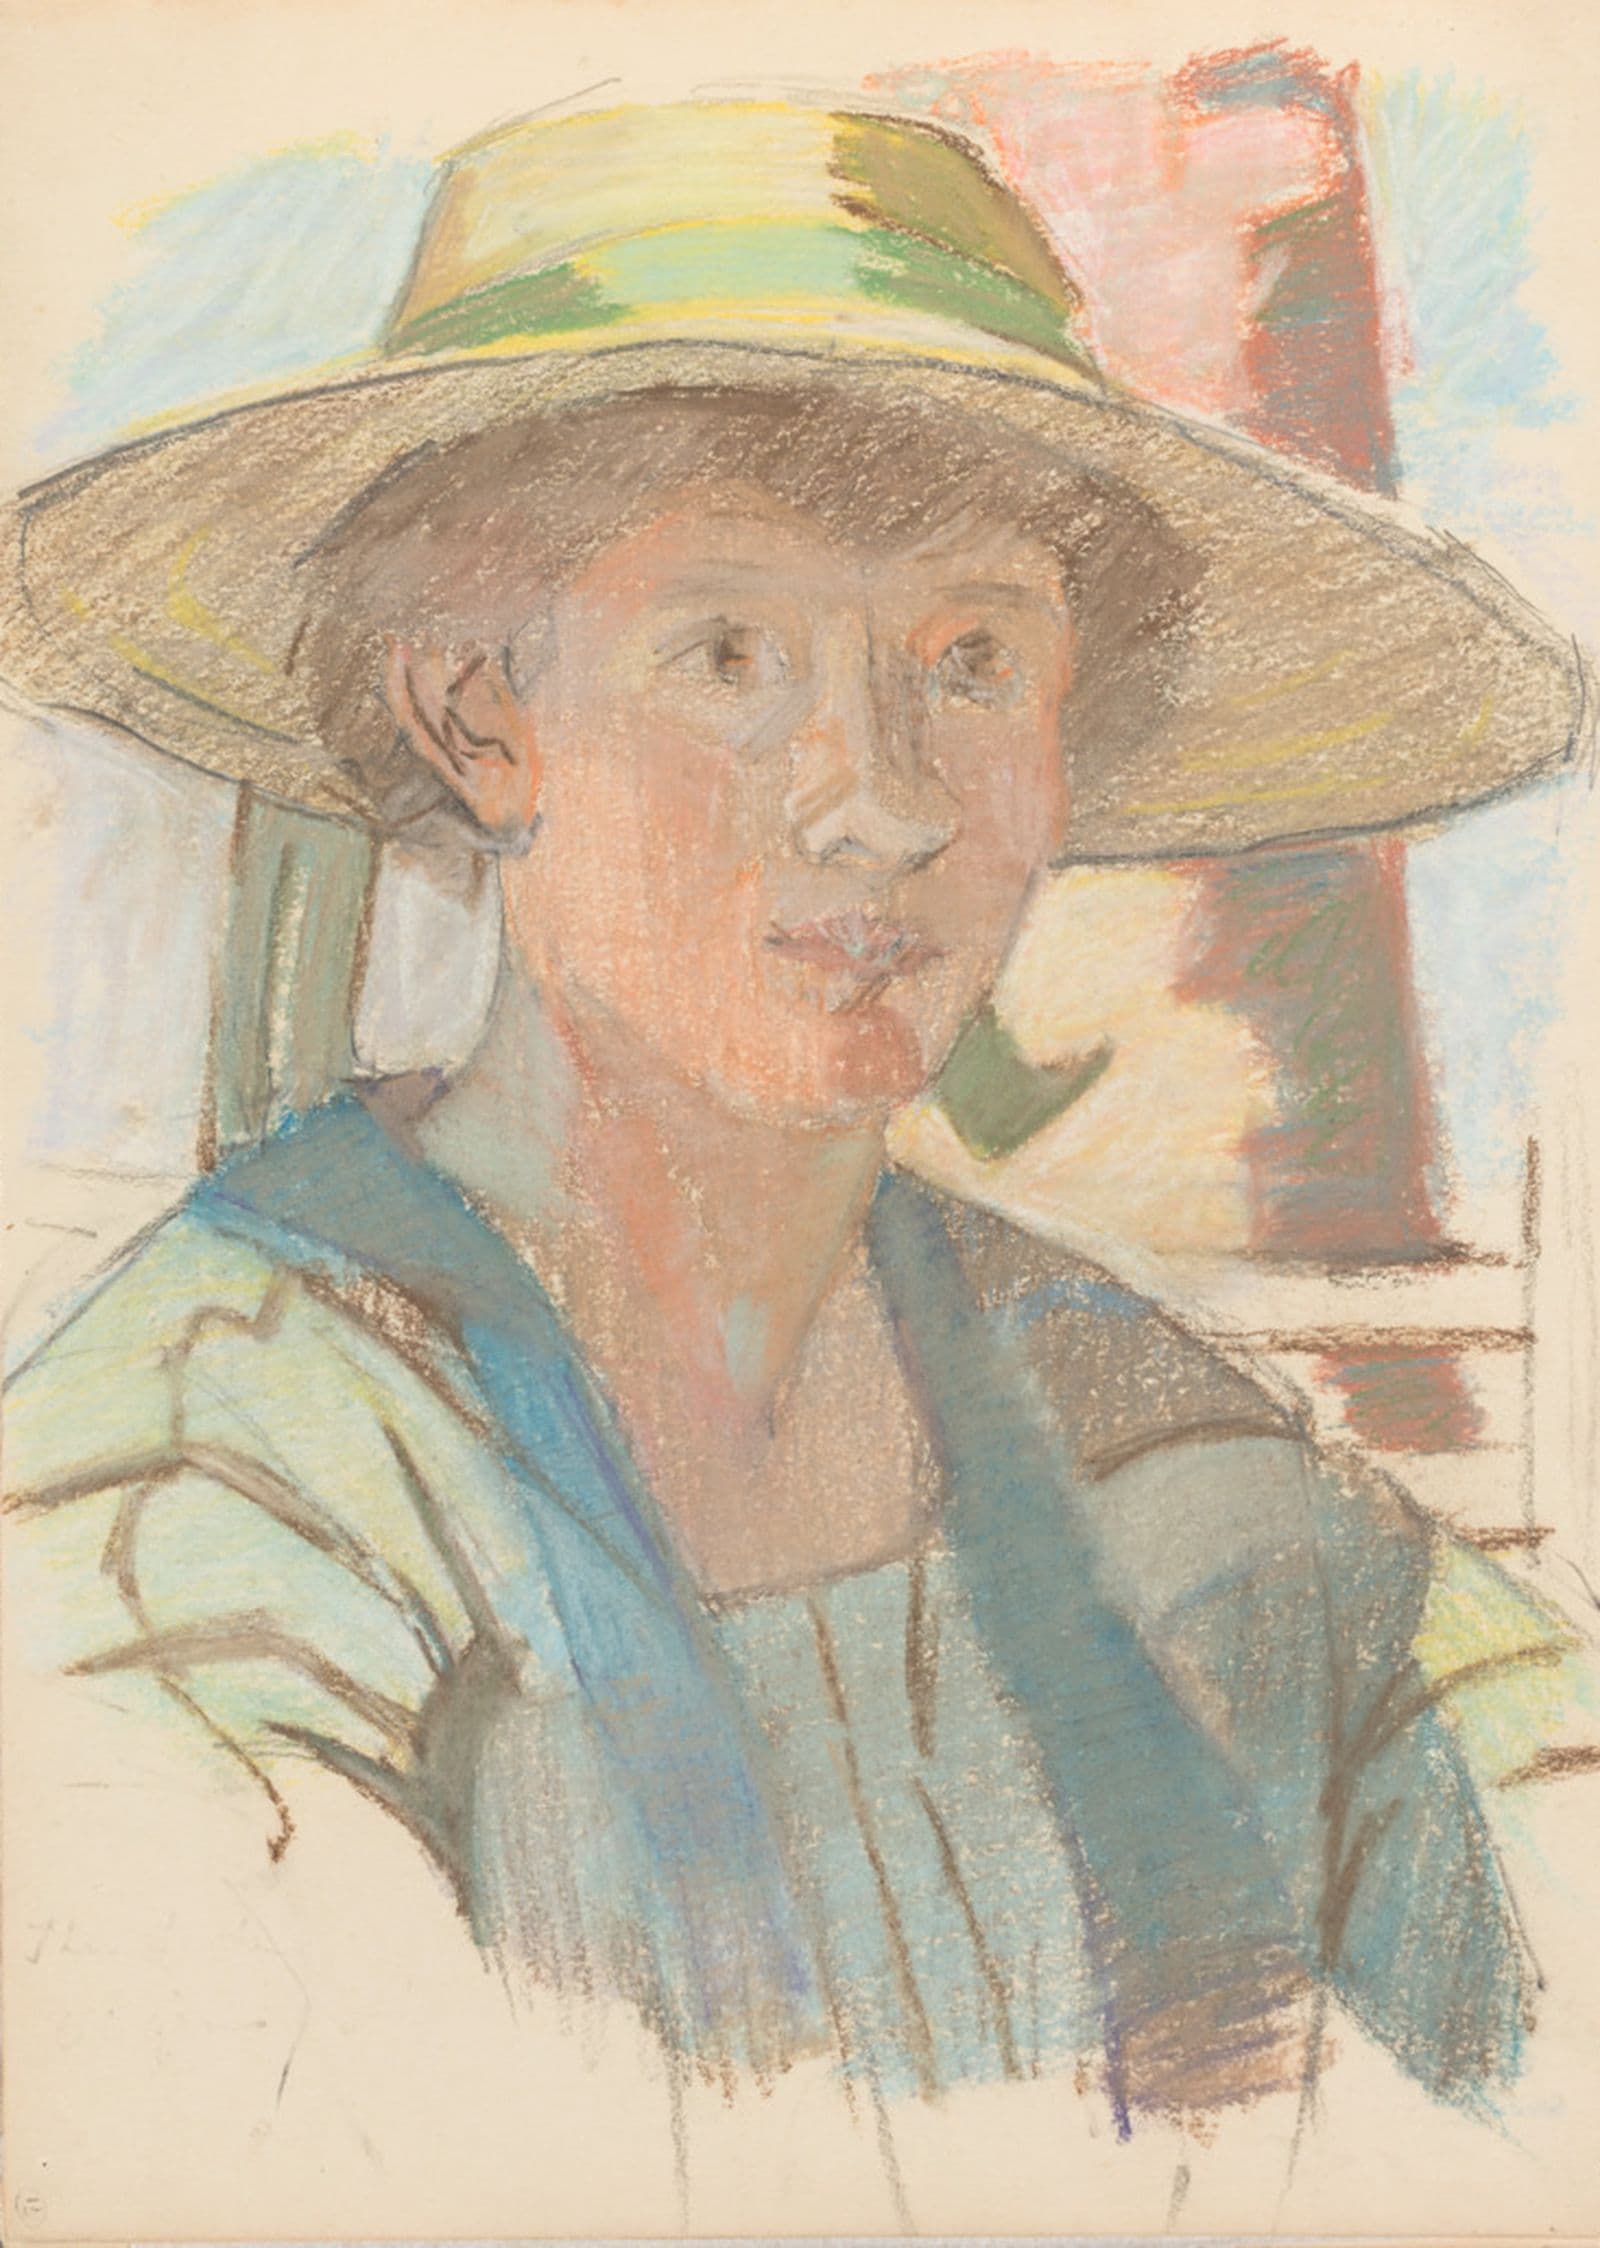 A sketch of a woman in a woven hat